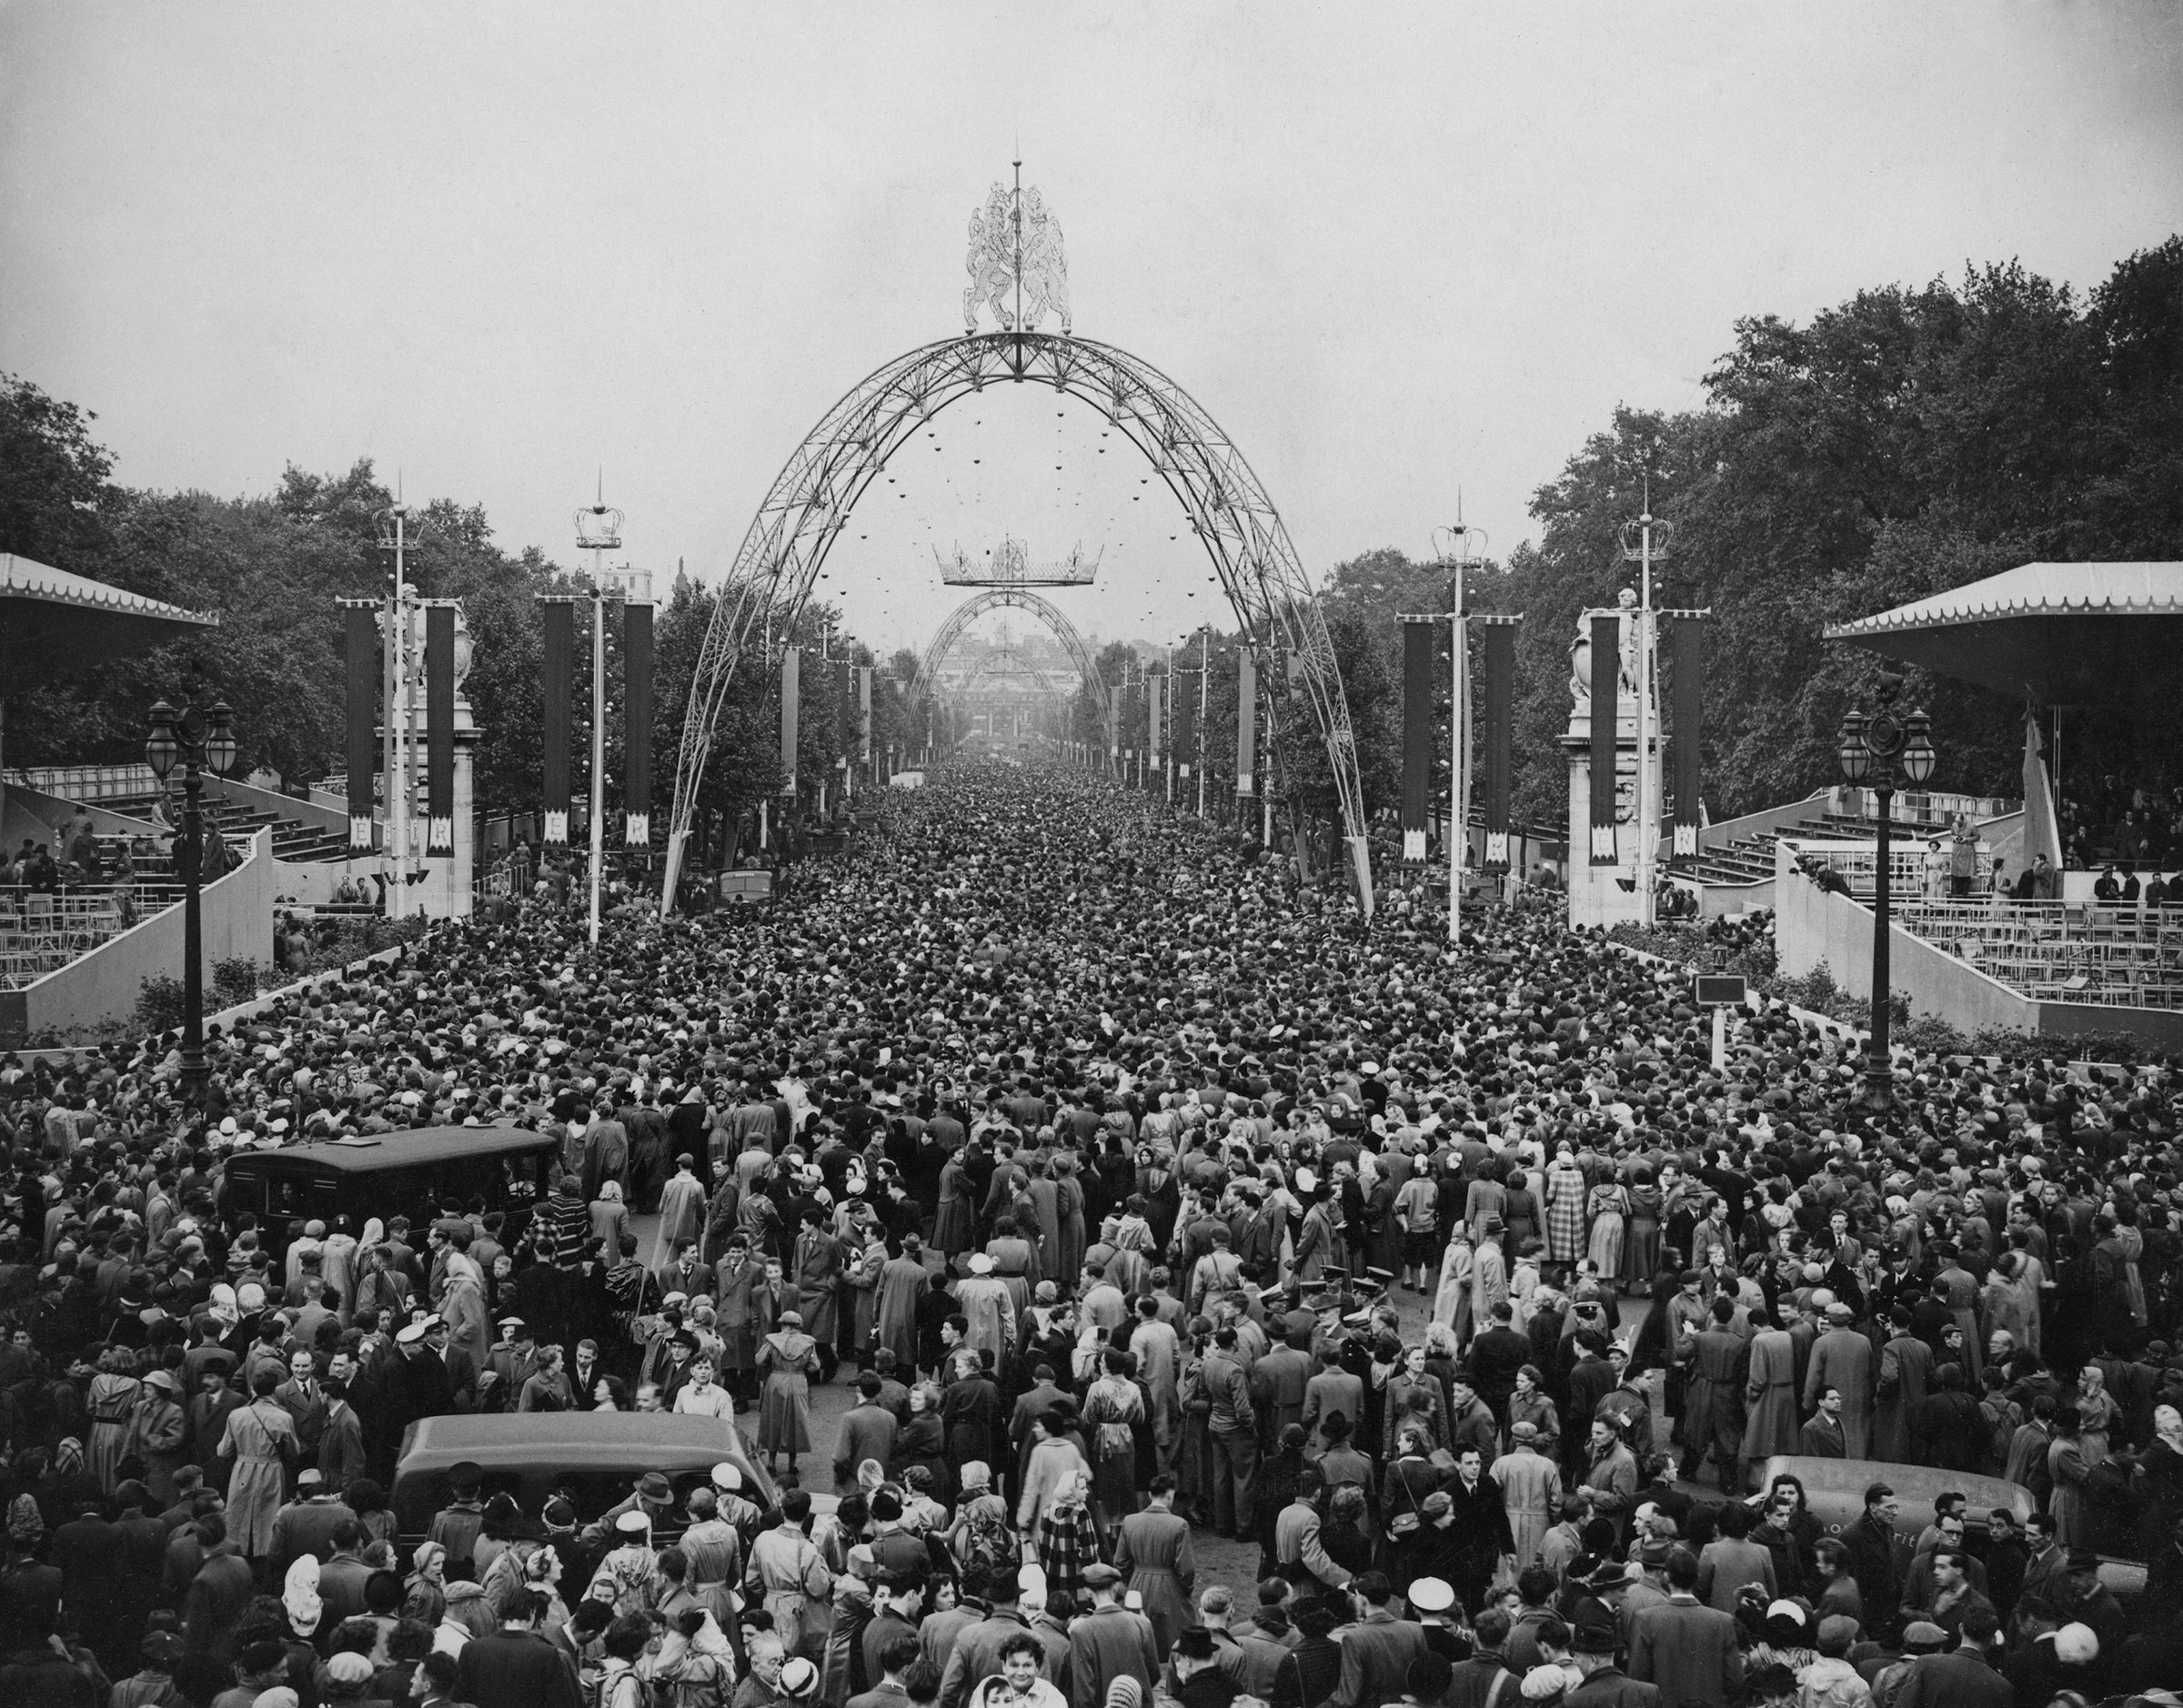 A crowd gathers to watch the return of Queen Elizabeth II to the Palace after the Coronation State Drive through London, on June 2, 1953. (Reg Burkett—Keystone/Getty Images)